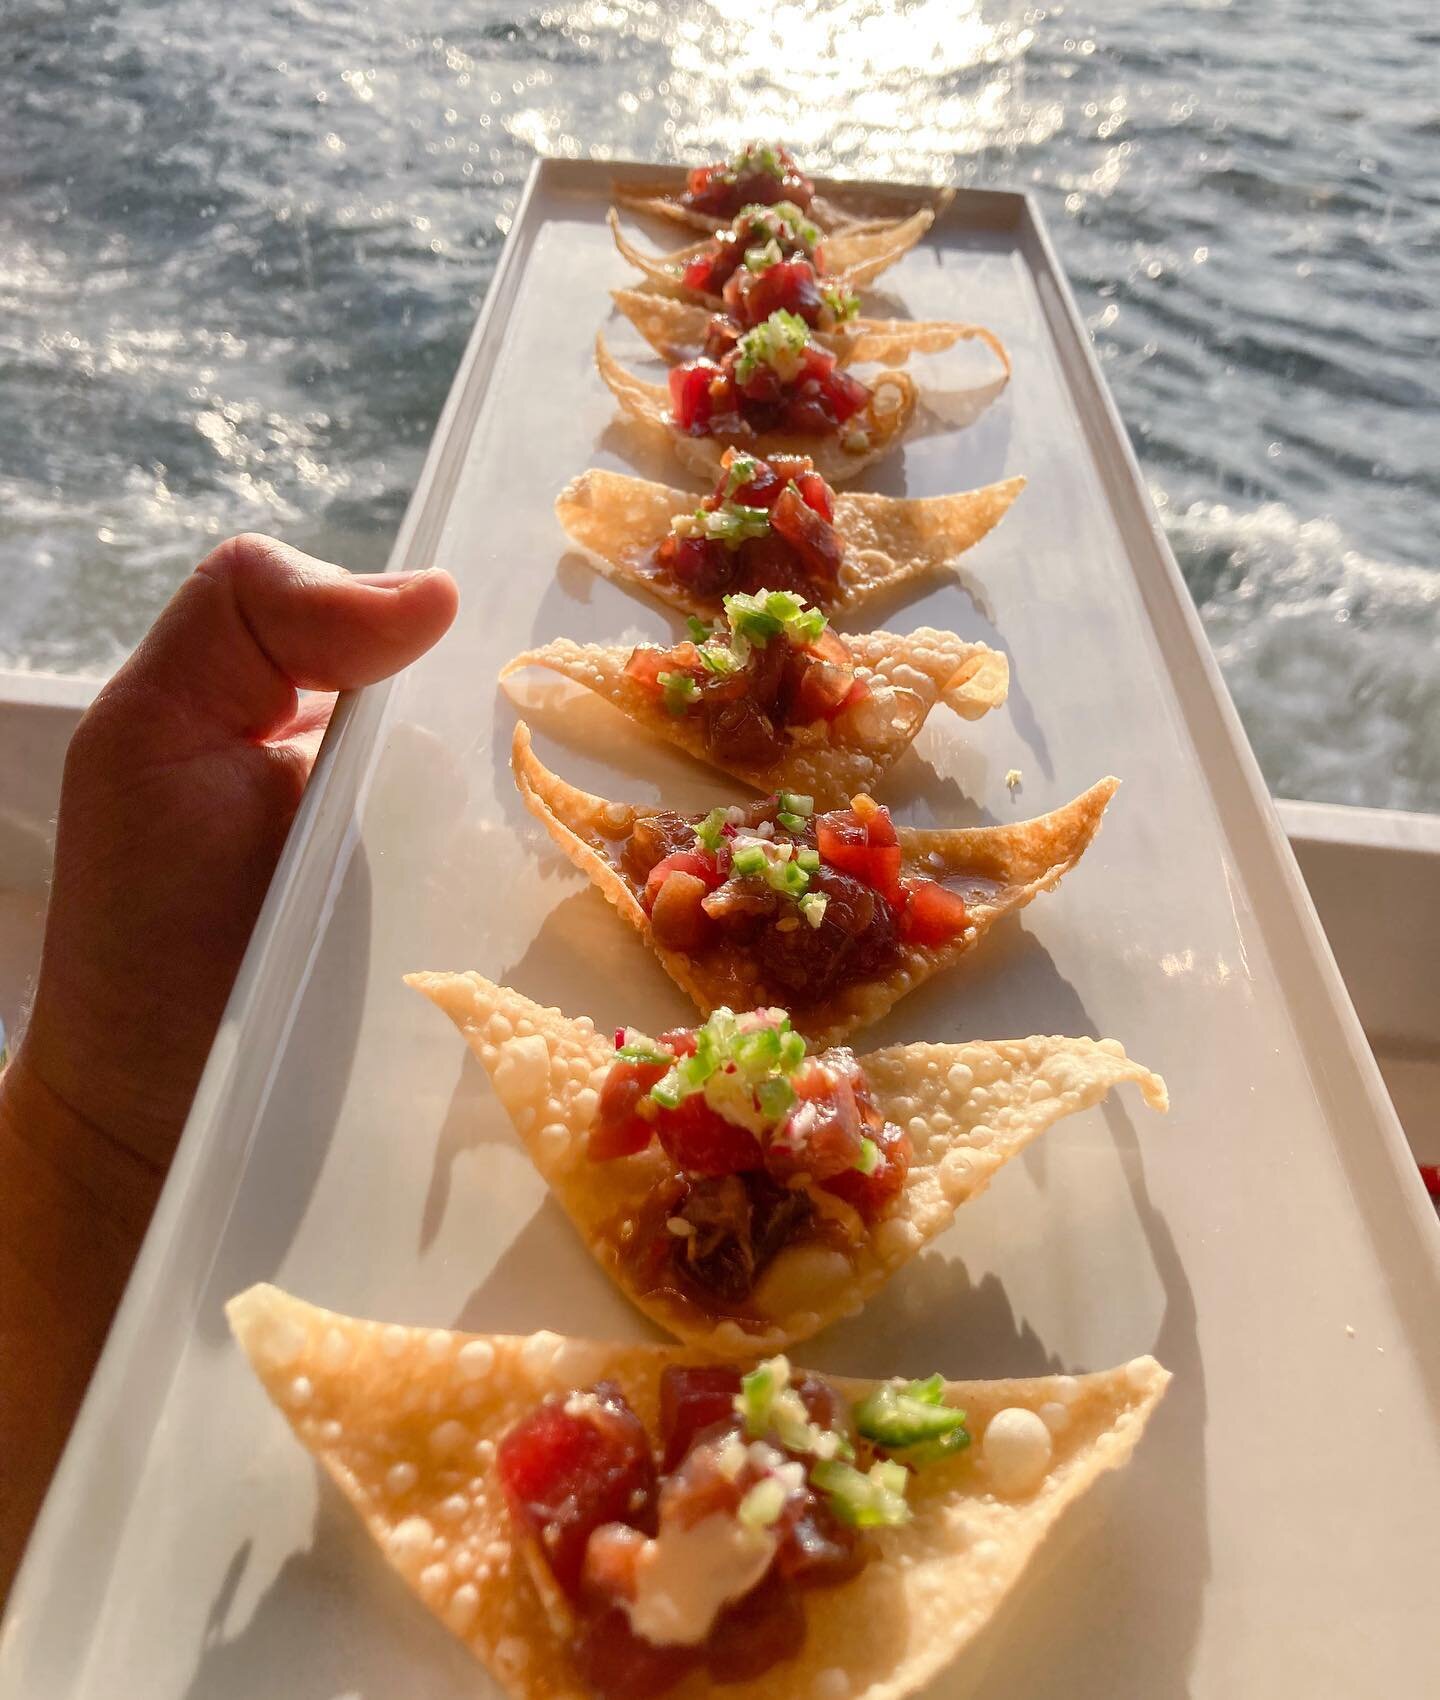 Tuna tartare on deck! 🛳🍣

#chefconsultant #cheflife #ctbites #chef #food #catering #personalchef #instafood #chefsofinstagram #foodstagram #foodporn #foodphotography #foodlover #cooking #caterer #mealprep #foodnetwork #delicious #privatedining #din